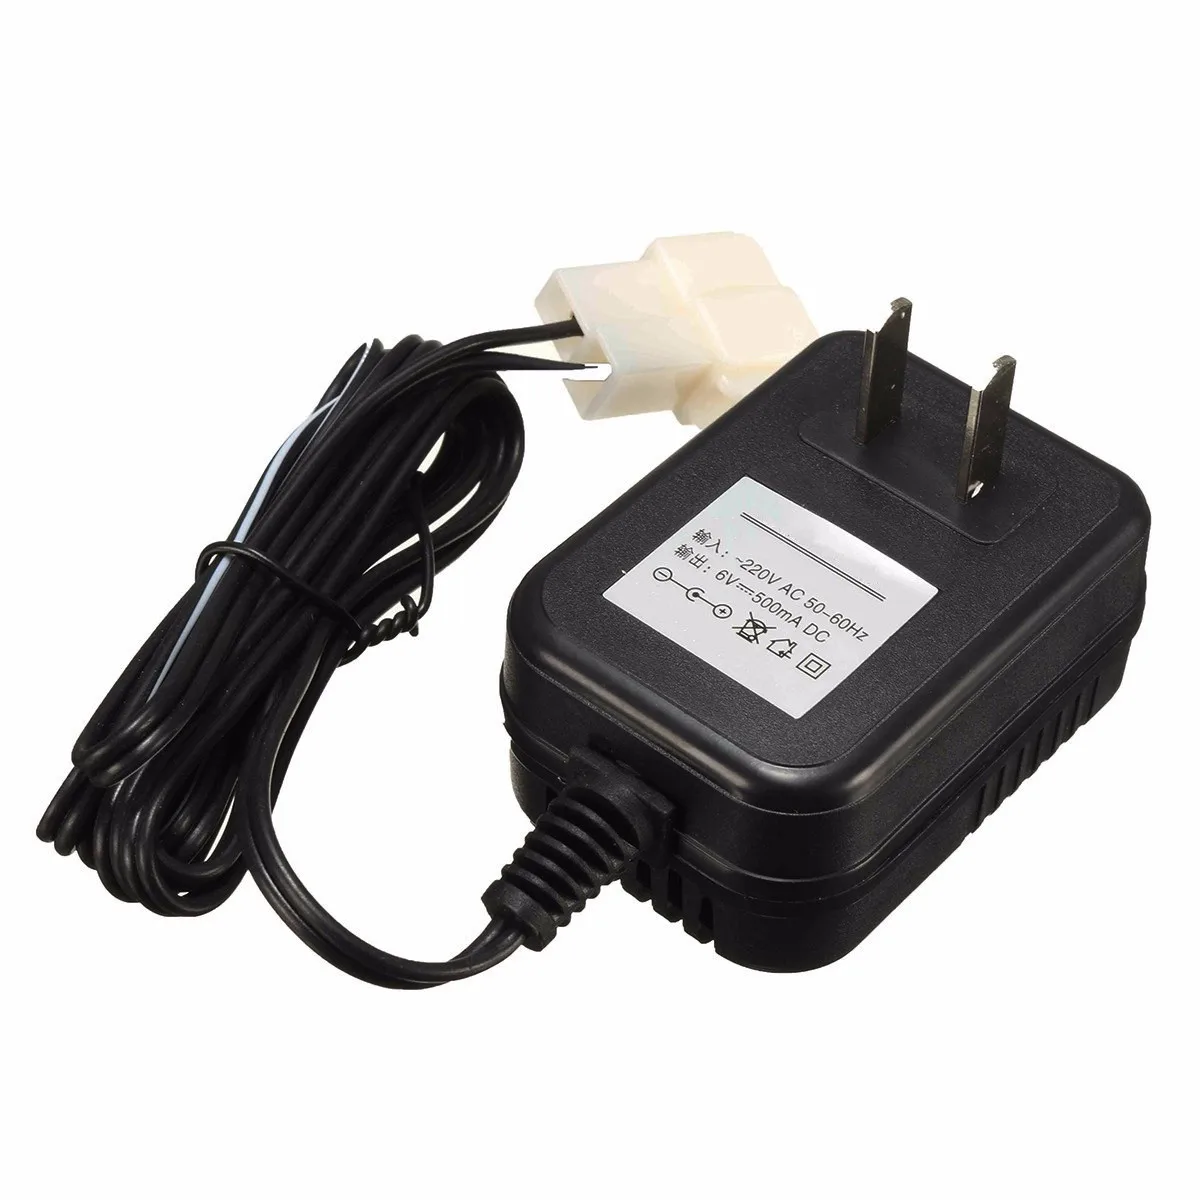 New Wall Charger AC Adapter For 6V Battery Powered Ride On Kid TRAX ATV Quad Car 